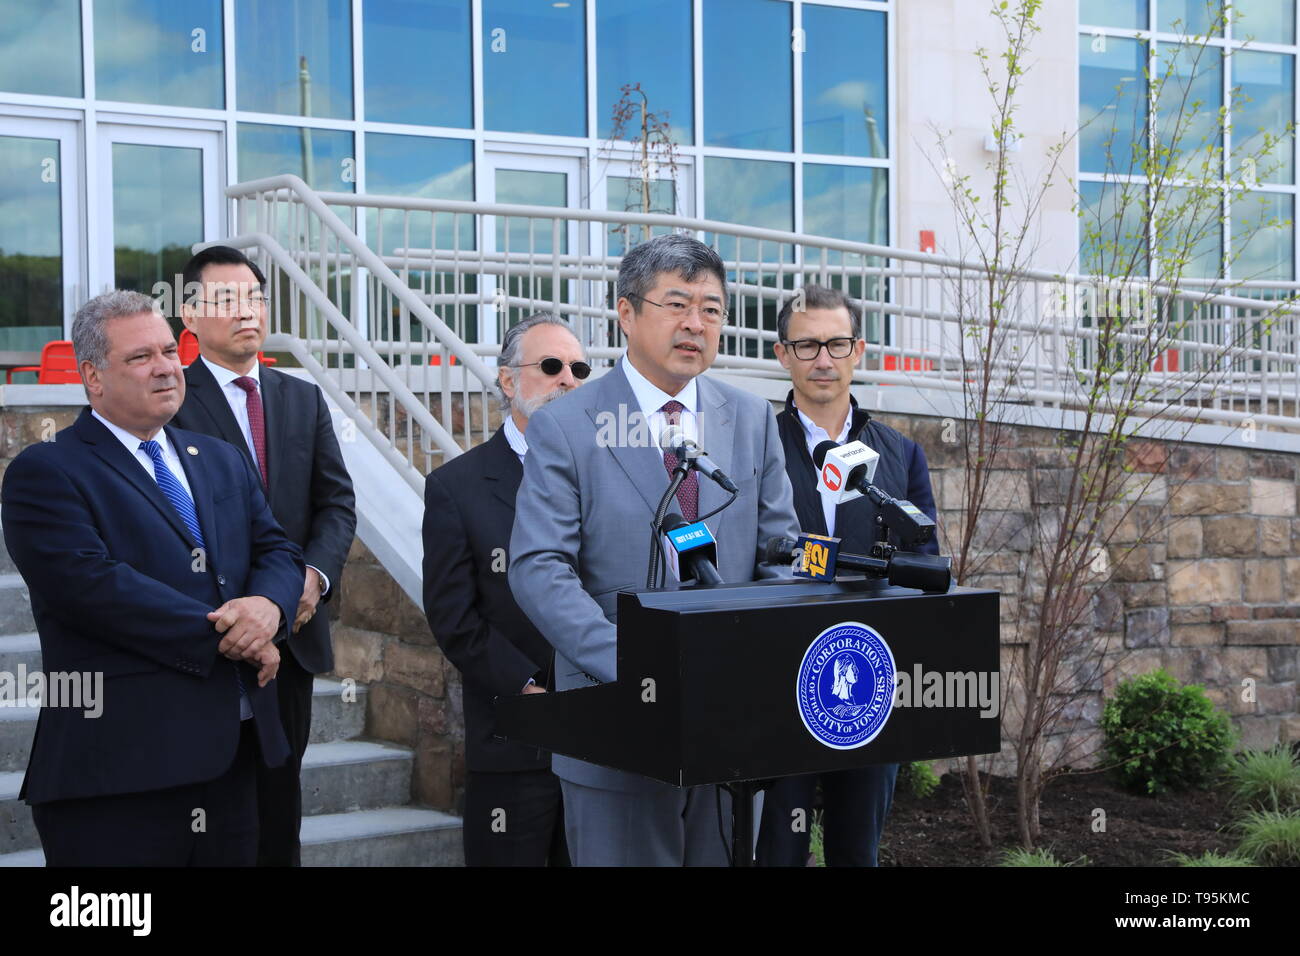 (190516) -- NEW YORK, May 16, 2019 (Xinhua) -- Yuan Ning (2nd R), board chairman and president of China Construction America, gives a speech during a ribbon-cutting ceremony in the city of Yonkers, in the U.S. state of New York, on May 15, 2019. A China-invested residential building officially opened on Wednesday in the city of Yonkers, in the U.S. state of New York. The River Club at Hudson Park, a 214-unit luxury apartment building, is a public-private partnership project developed by China Construction America (CCA) since 2015. It helped complete the three-phased Hudson Park development pla Stock Photo